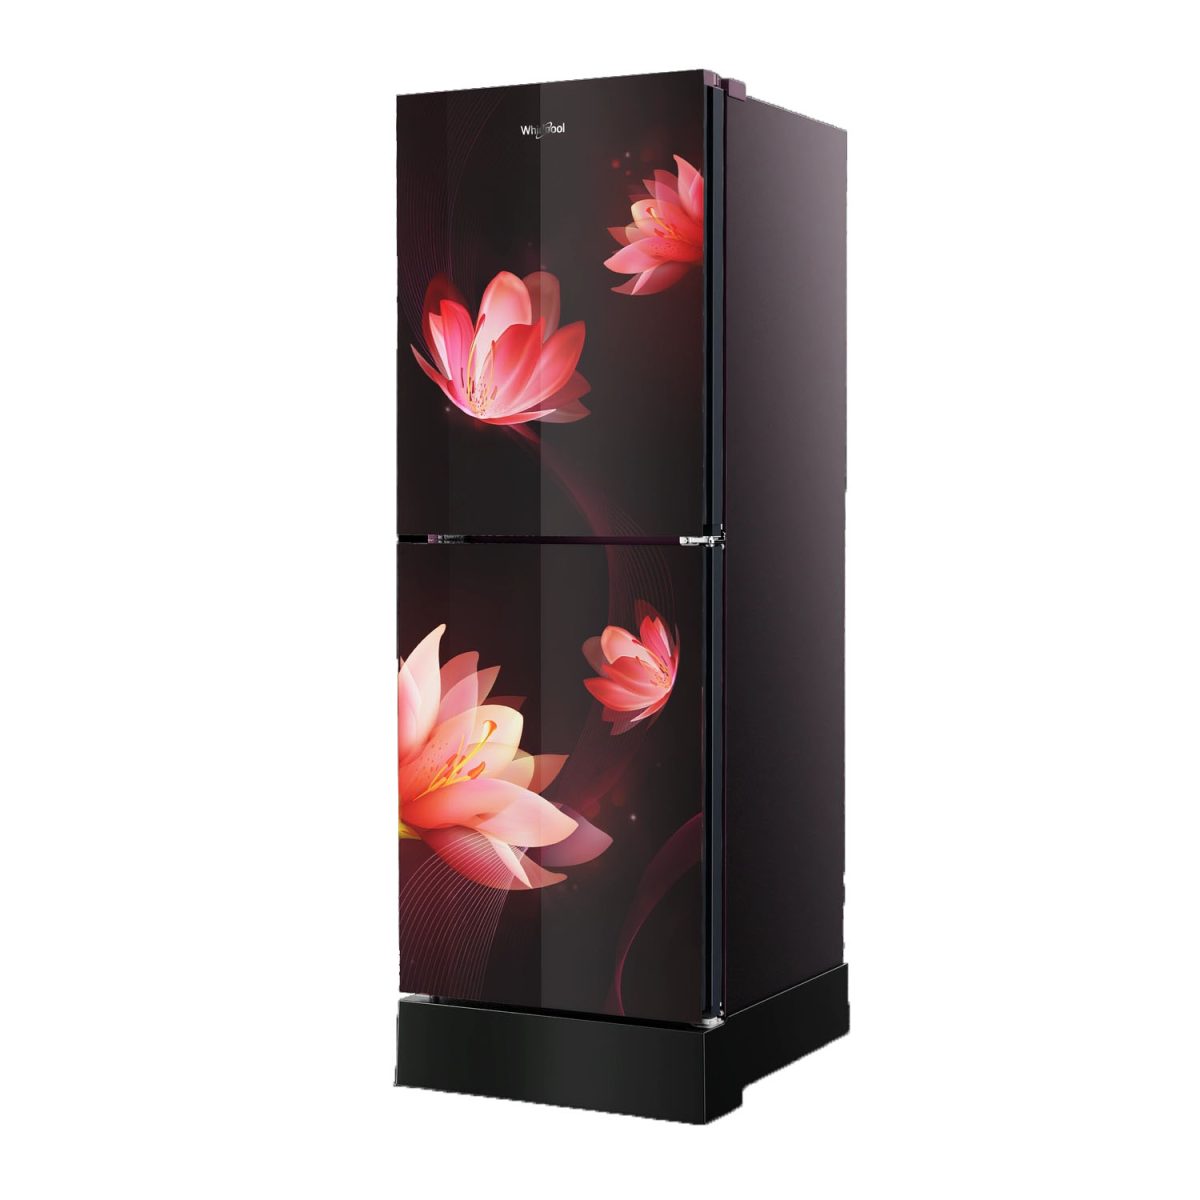 WHIRLPOOL 278 Liter Refrigerator FreshMagic Pro Florina Red , Best Refrigerators of Year, Top-rated Refrigerators, Refrigerator Reviews, Refrigerator Comparison, Buying a Refrigerator Guide, Refrigerator Deals and Offers WHIRLPOOL 257 Liter Refrigerator FreshMagic Pro Florina Red, Best Refrigerators of Year, Top-rated Refrigerators, Refrigerator Reviews, Refrigerator Comparison, Buying a Refrigerator Guide, Refrigerator Deals and Offers WHIRLPOOL 236 Liter Refrigerator FreshMagic Pro Florina Red , Best Refrigerators of Year, Top-rated Refrigerators, Refrigerator Reviews, Refrigerator Comparison, Buying a Refrigerator Guide, Refrigerator Deals and Offers WHIRLPOOL 236 Liter Refrigerator FreshMagic Pro Florina Red , Best Refrigerators of Year, Top-rated Refrigerators, Refrigerator Reviews, Refrigerator Comparison, Buying a Refrigerator Guide, Refrigerator Deals and Offers Best Refrigerators of Year, Top-rated Refrigerators, Refrigerator Reviews, Refrigerator Comparison, Buying a Refrigerator Guide, Refrigerator Deals and Offers, Best refrigerators in Chittagong, Best selling refrigerators in Chittagong, Best Electronics Store in Chittagong, Meem Electronics, MeemElectronics, Best Deal of Refrigerator, WHIRLPOOL Refrigerator price in Chittagong, WHIRLPOOL Refrigerator price in Bangladersh, 278 Liter Refrigerator, WHIRLPOOL Refrigerator, 01919382008, 01919382009, 019193820010 Best Refrigerators of Year, Top-rated Refrigerators, Refrigerator Reviews, Refrigerator Comparison, Buying a Refrigerator Guide, Refrigerator Deals and Offers, Best refrigerators in Chittagong, Best selling refrigerators in Chittagong, Best Electronics Store in Chittagong, Meem Electronics, MeemElectronics, Best Deal of Refrigerator, WHIRLPOOL Refrigerator price in Chittagong, WHIRLPOOL Refrigerator price in Bangladersh, 257 Liter Refrigerator, WHIRLPOOL Refrigerator, 01919382008, 01919382009, 019193820010 Best Refrigerators of Year, Top-rated Refrigerators, Refrigerator Reviews, Refrigerator Comparison, Buying a Refrigerator Guide, Refrigerator Deals and Offers, Best refrigerators in Chittagong, Best selling refrigerators in Chittagong, Best Electronics Store in Chittagong, Meem Electronics, MeemElectronics, Best Deal of Refrigerator, WHIRLPOOL Refrigerator price in Chittagong, WHIRLPOOL Refrigerator price in Bangladersh, 236 Liter Refrigerator, WHIRLPOOL Refrigerator, 01919382008, 01919382009, 019193820010